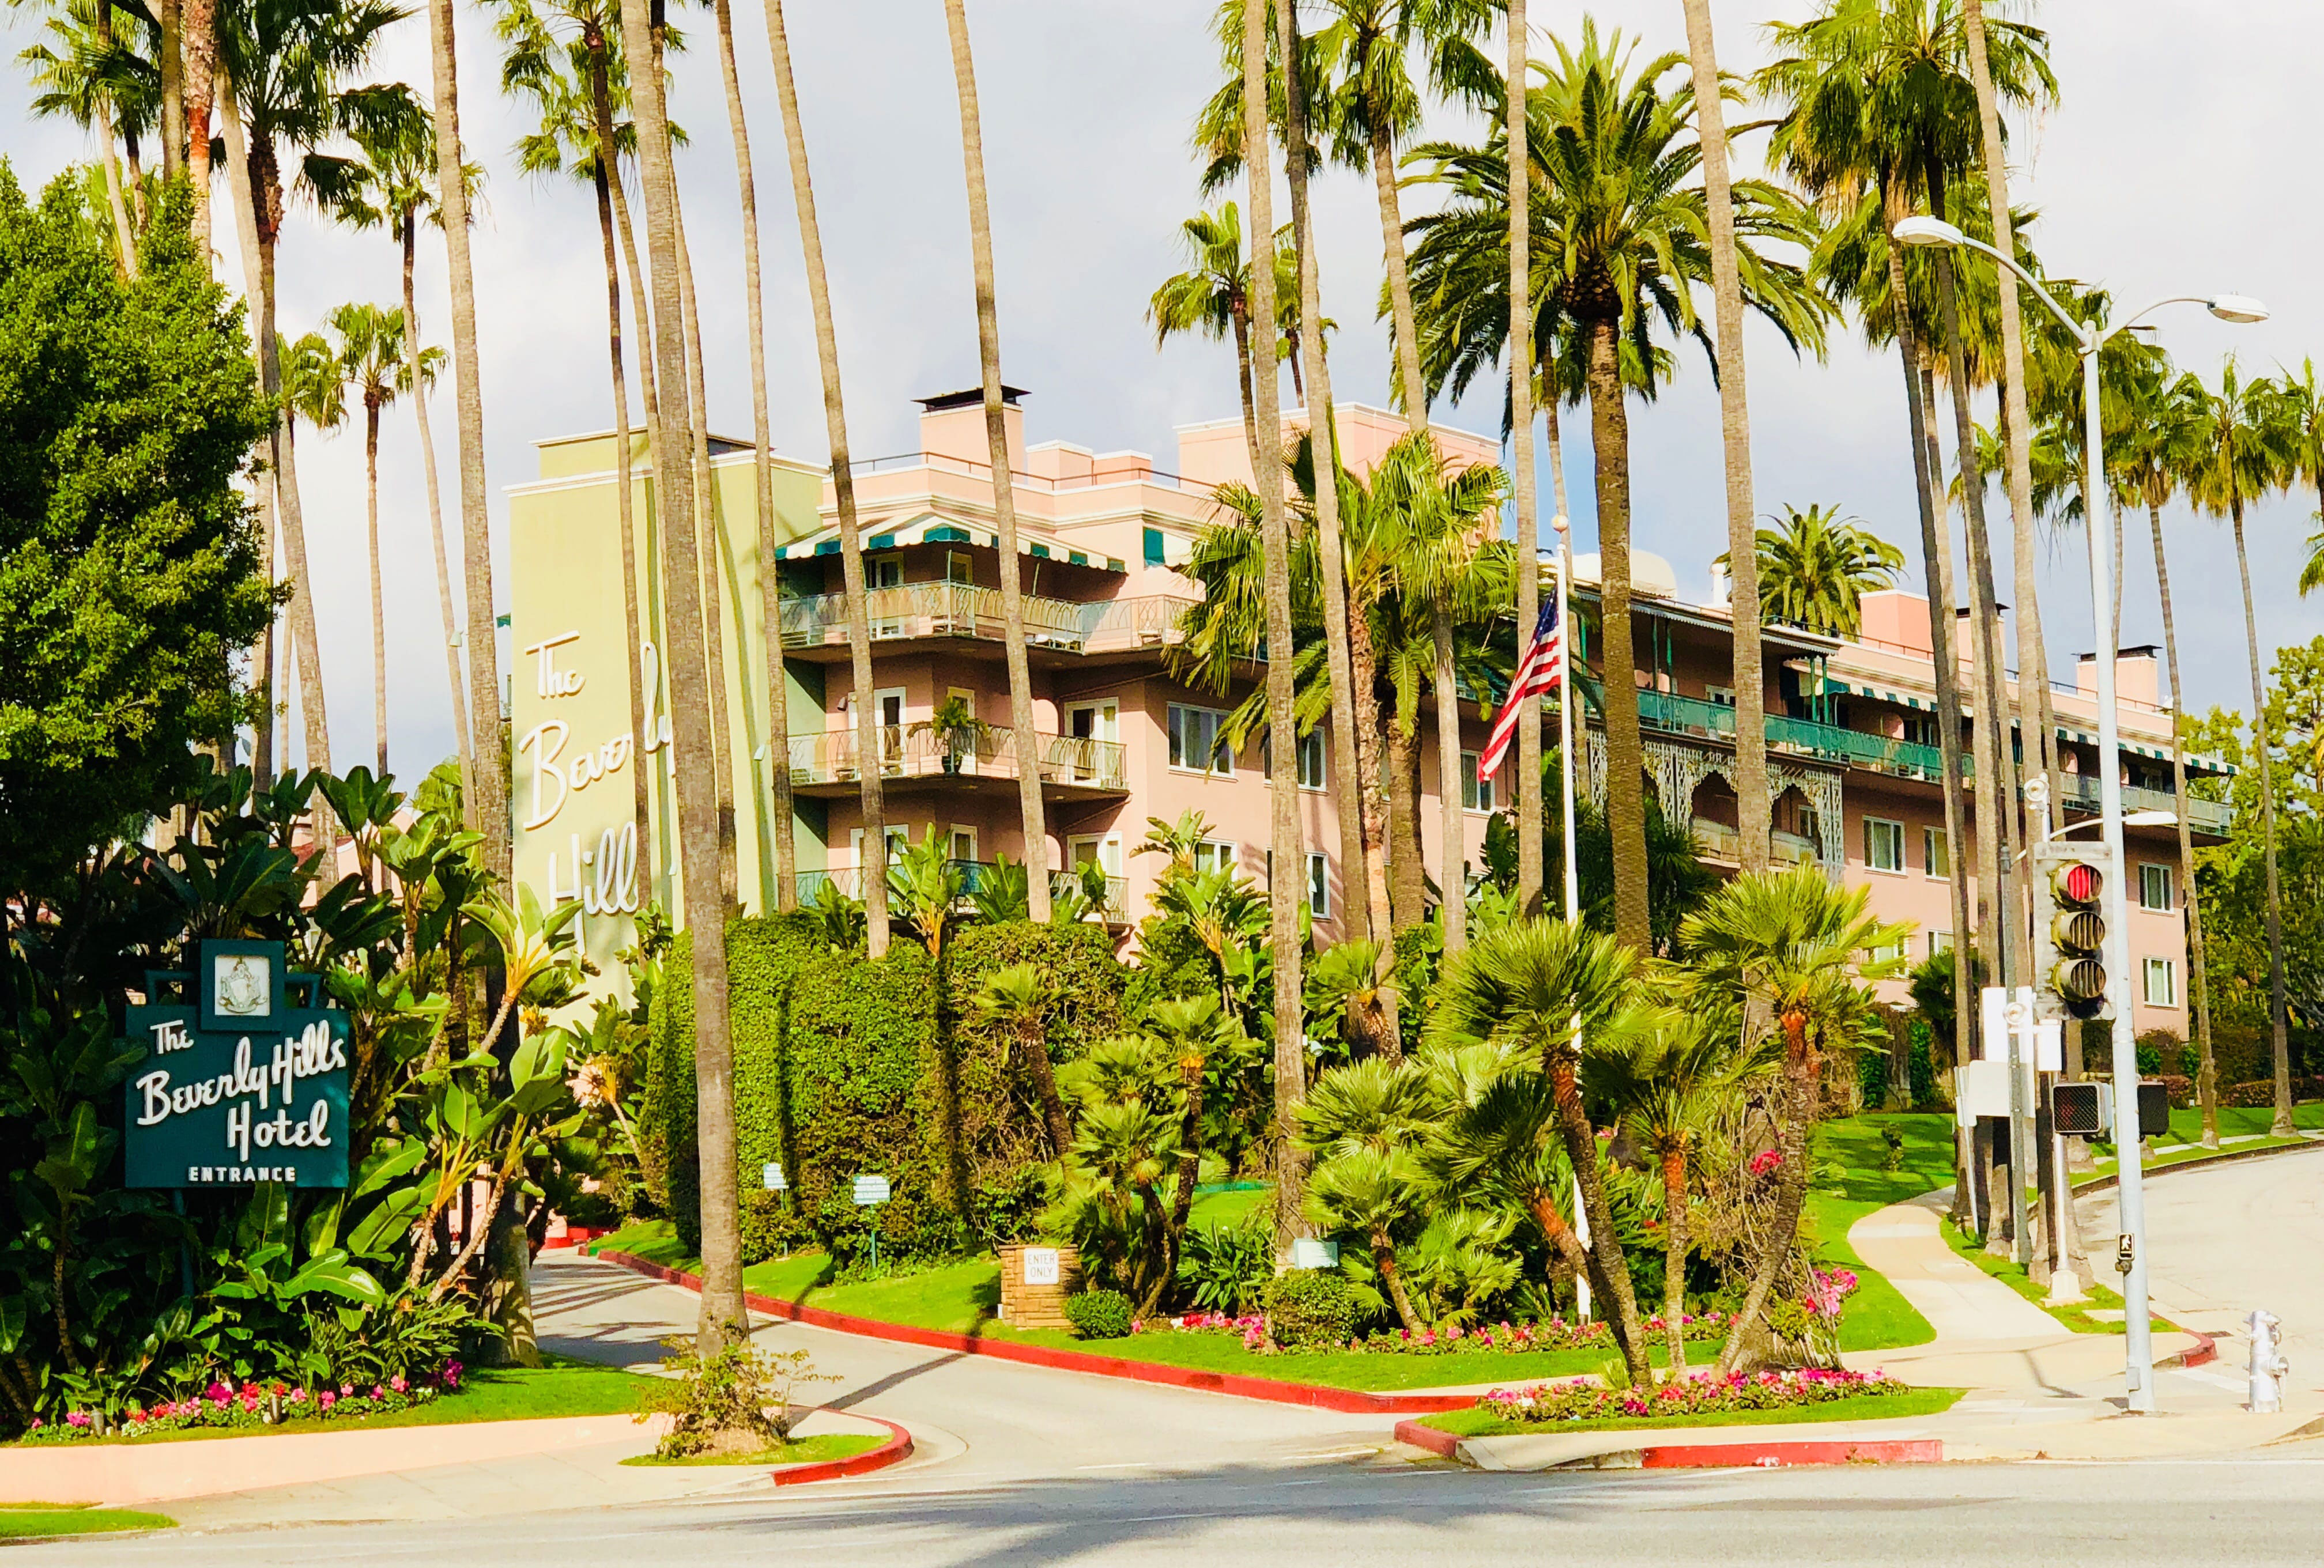 The Beverly Hills Hotel  Hotels in Beverly Hills, Los Angeles